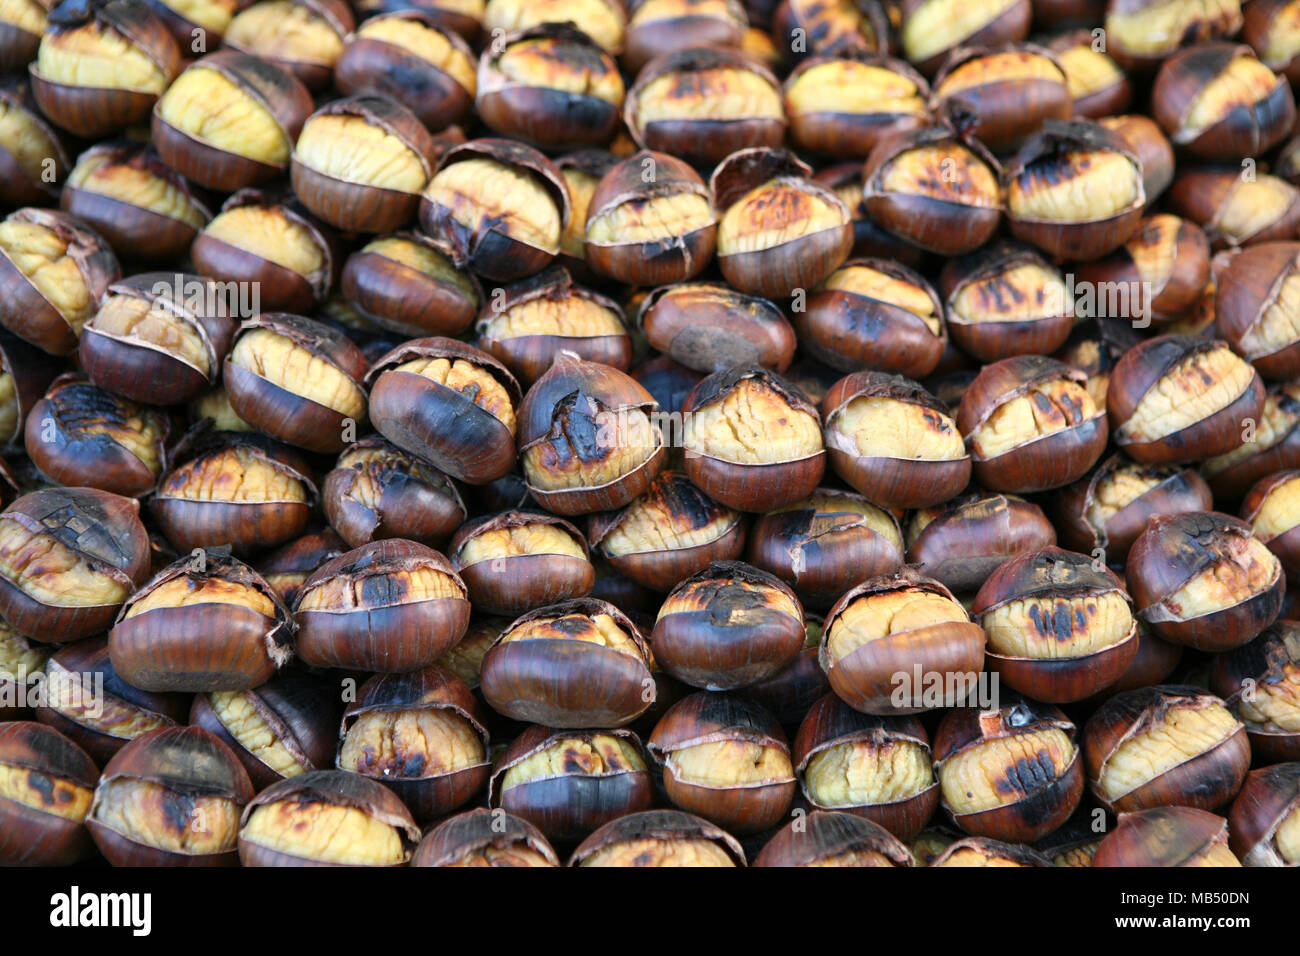 Bunch of roasted chestnuts Stock Photo